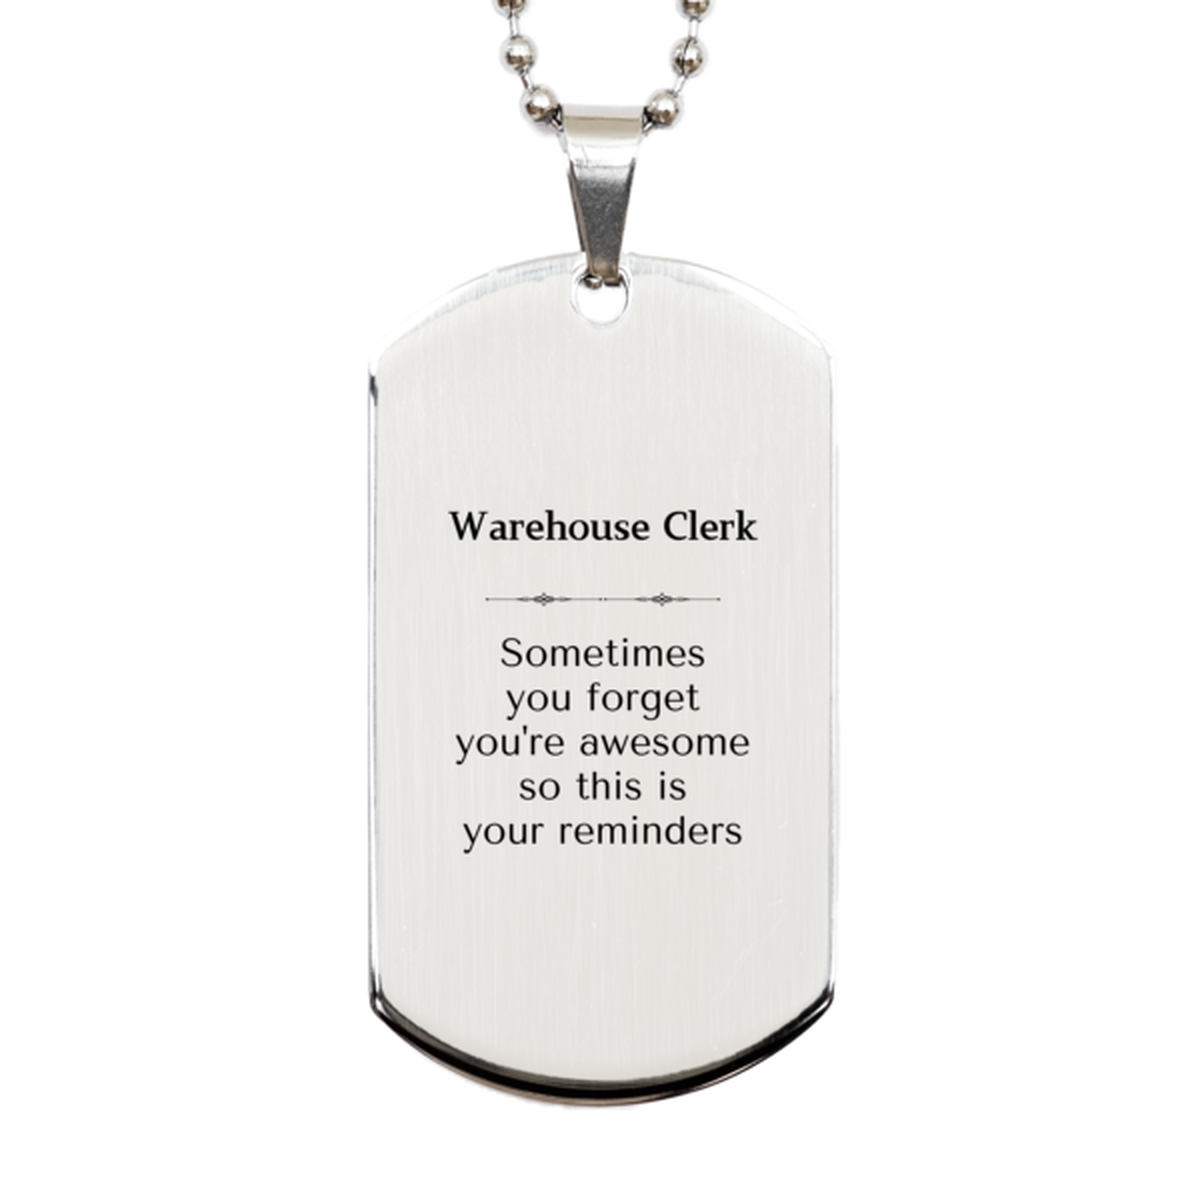 Sentimental Warehouse Clerk Silver Dog Tag, Warehouse Clerk Sometimes you forget you're awesome so this is your reminders, Graduation Christmas Birthday Gifts for Warehouse Clerk, Men, Women, Coworkers